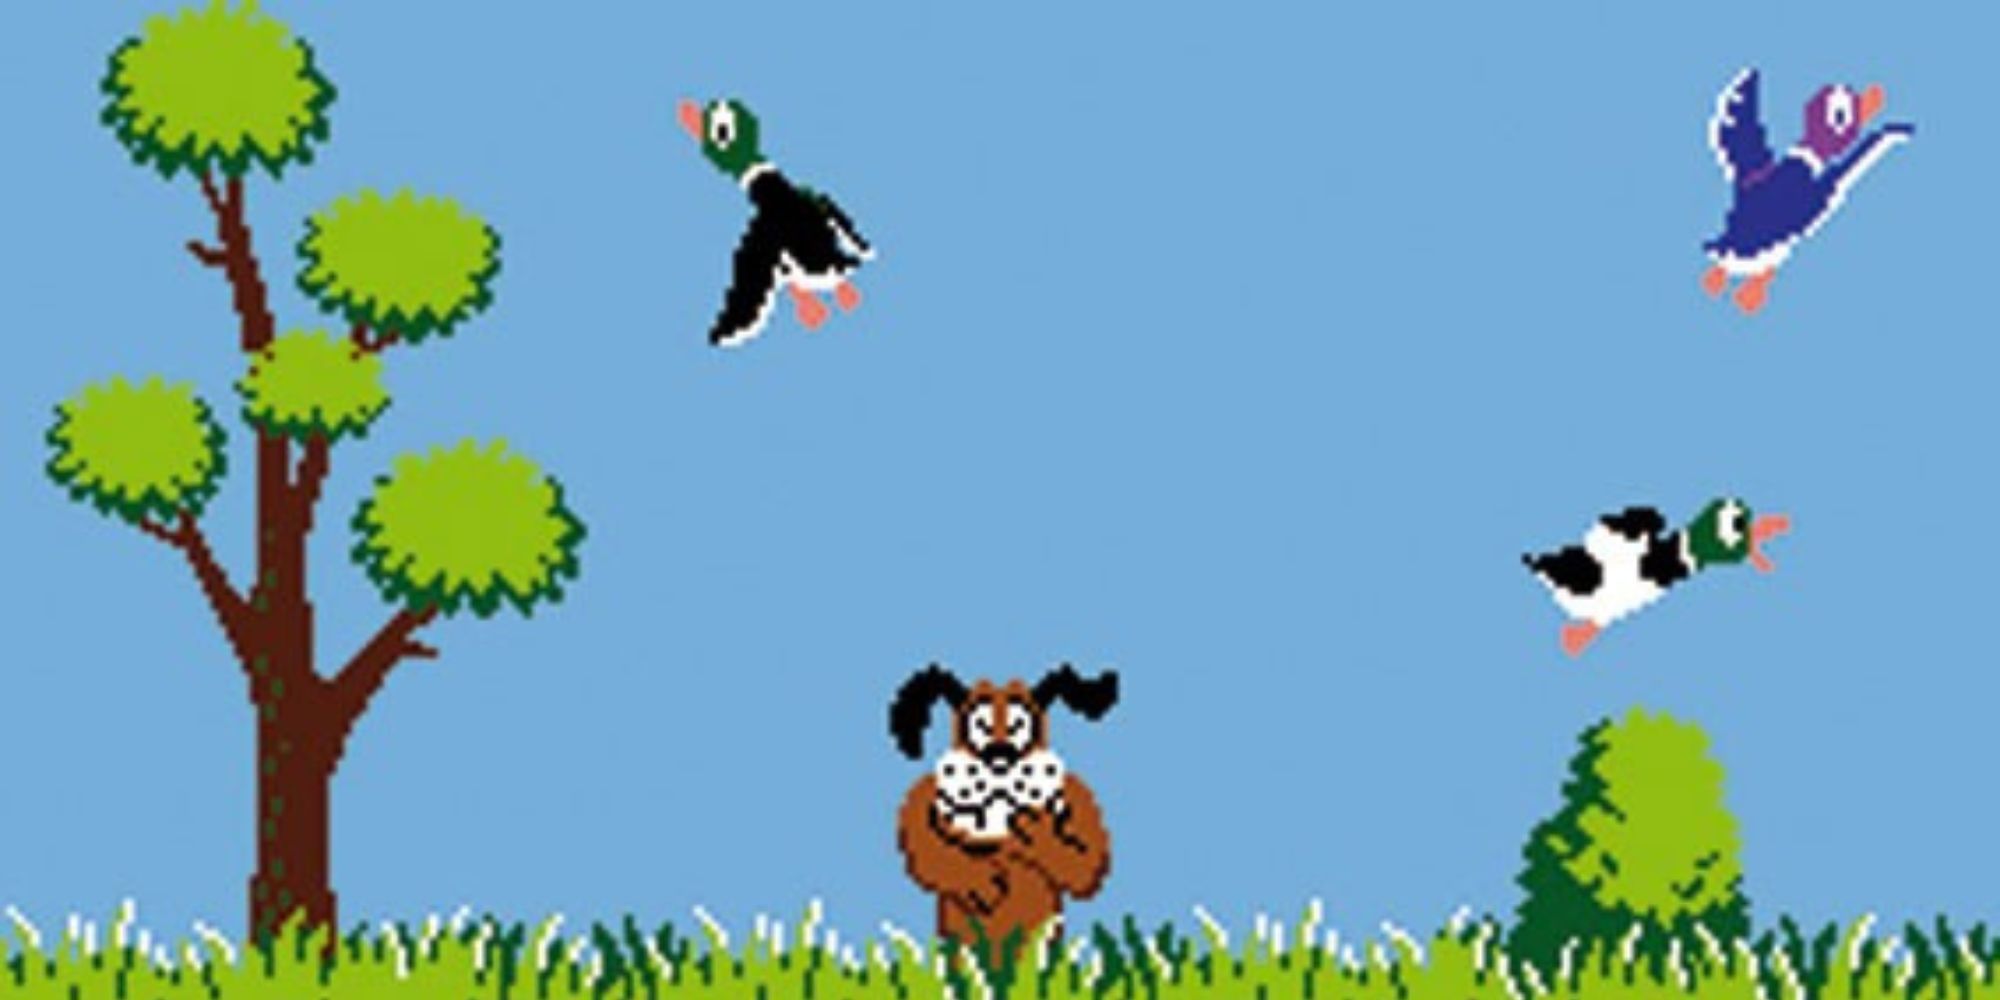 The Duck Hunt Dog laughs as ducks fly away